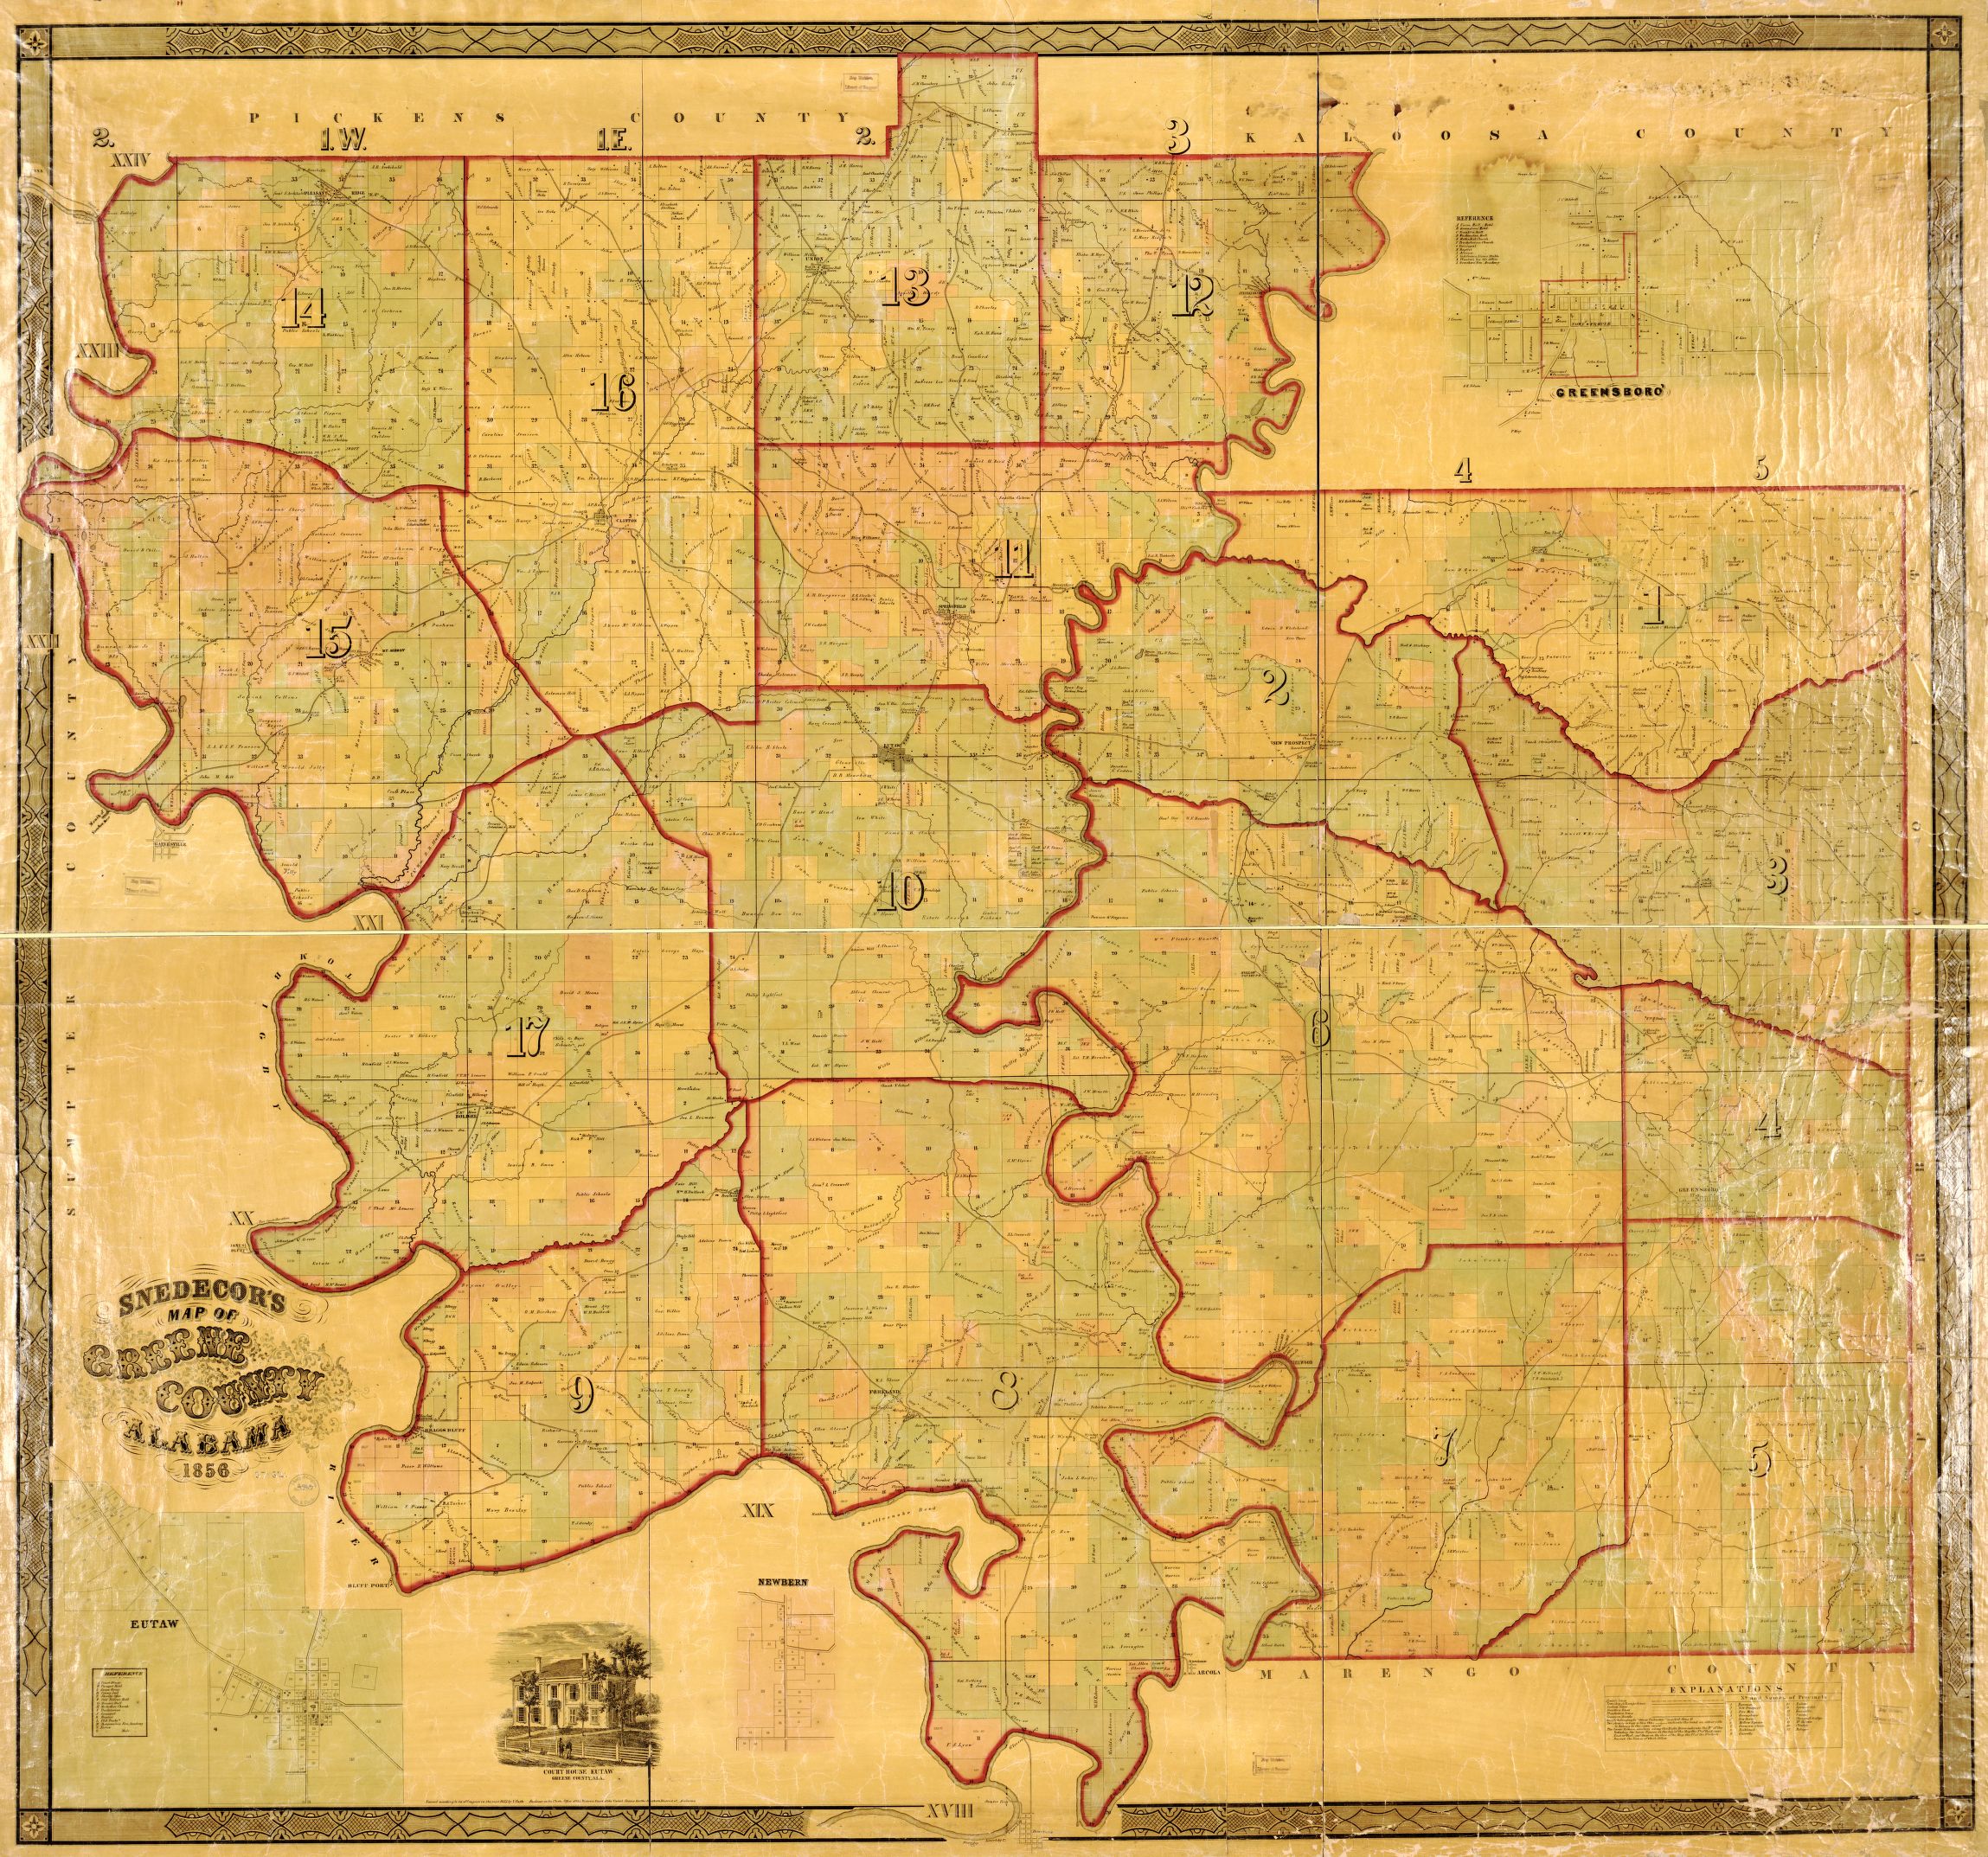 1856 Greene County, AL
See District 15 and 13.
Map created and published by:
 Victoria Gayle Snedecor (1824-1888)